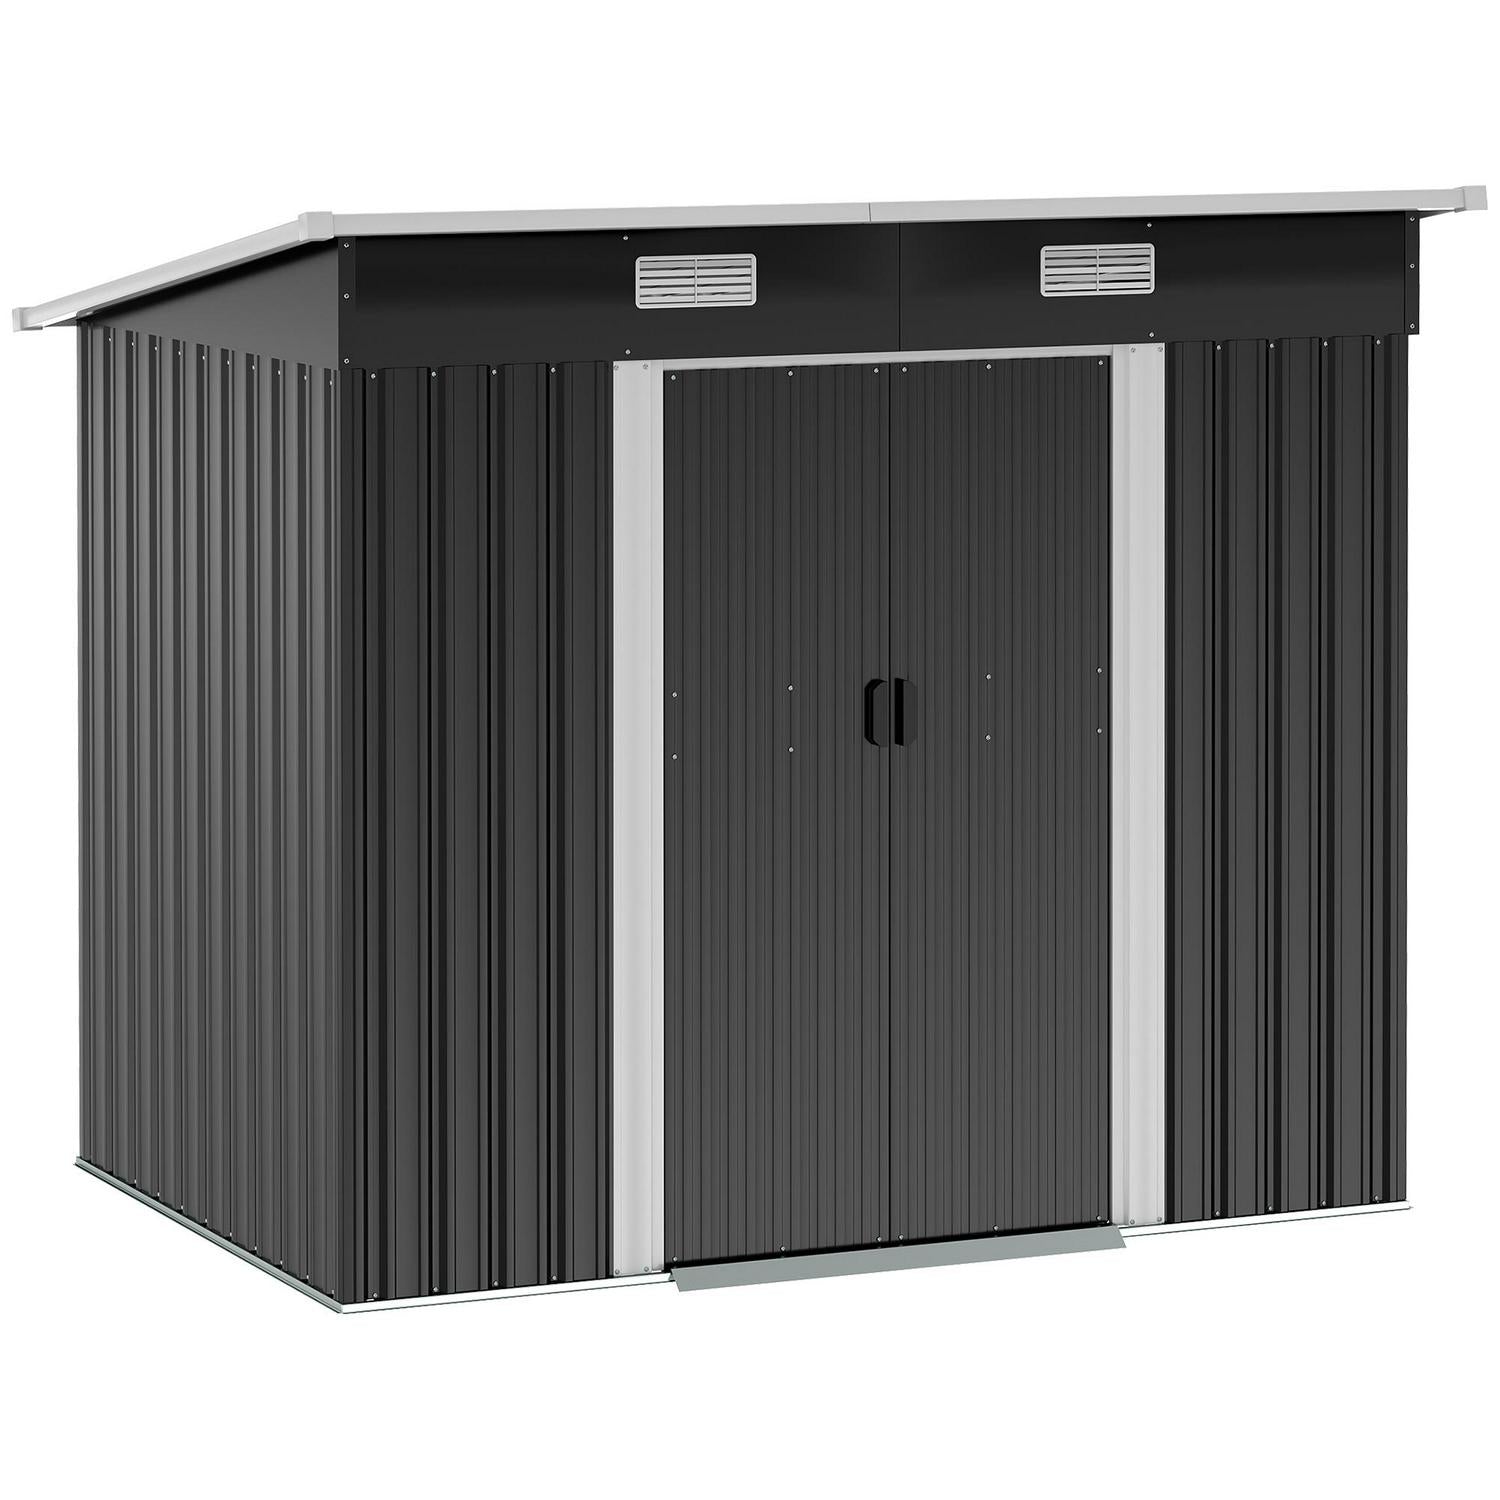 Outdoor Garden Storage Shed, Tool Box For Backyard, Patio And Lawn, Black (6.8 X 4.3)ft